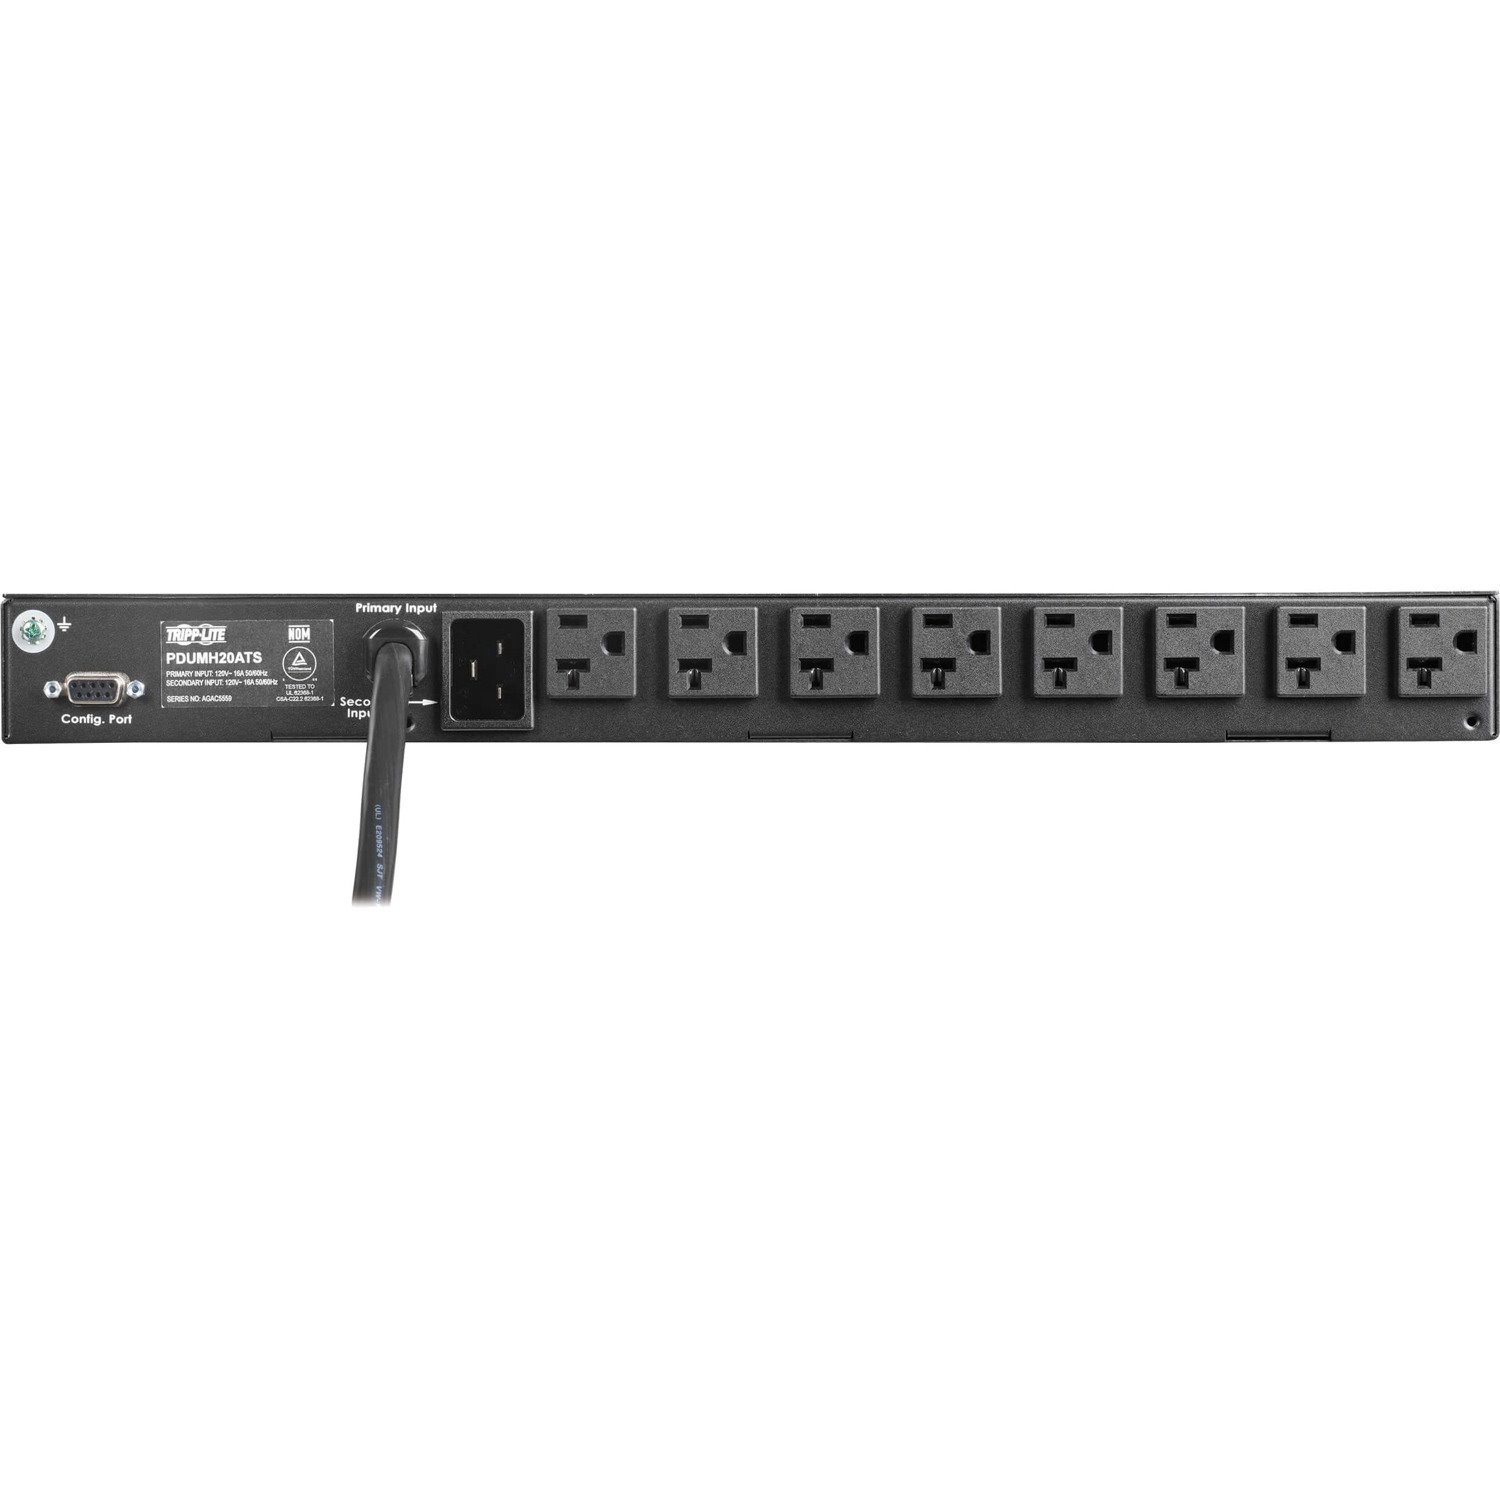 Tripp Lite by Eaton 1.92kW 120V Single-Phase ATS/Local Metered PDU - 16 5-15/20R Outlets, Dual L5-20P/5-20P Inputs, 12 ft. Cords, 1U, TAA